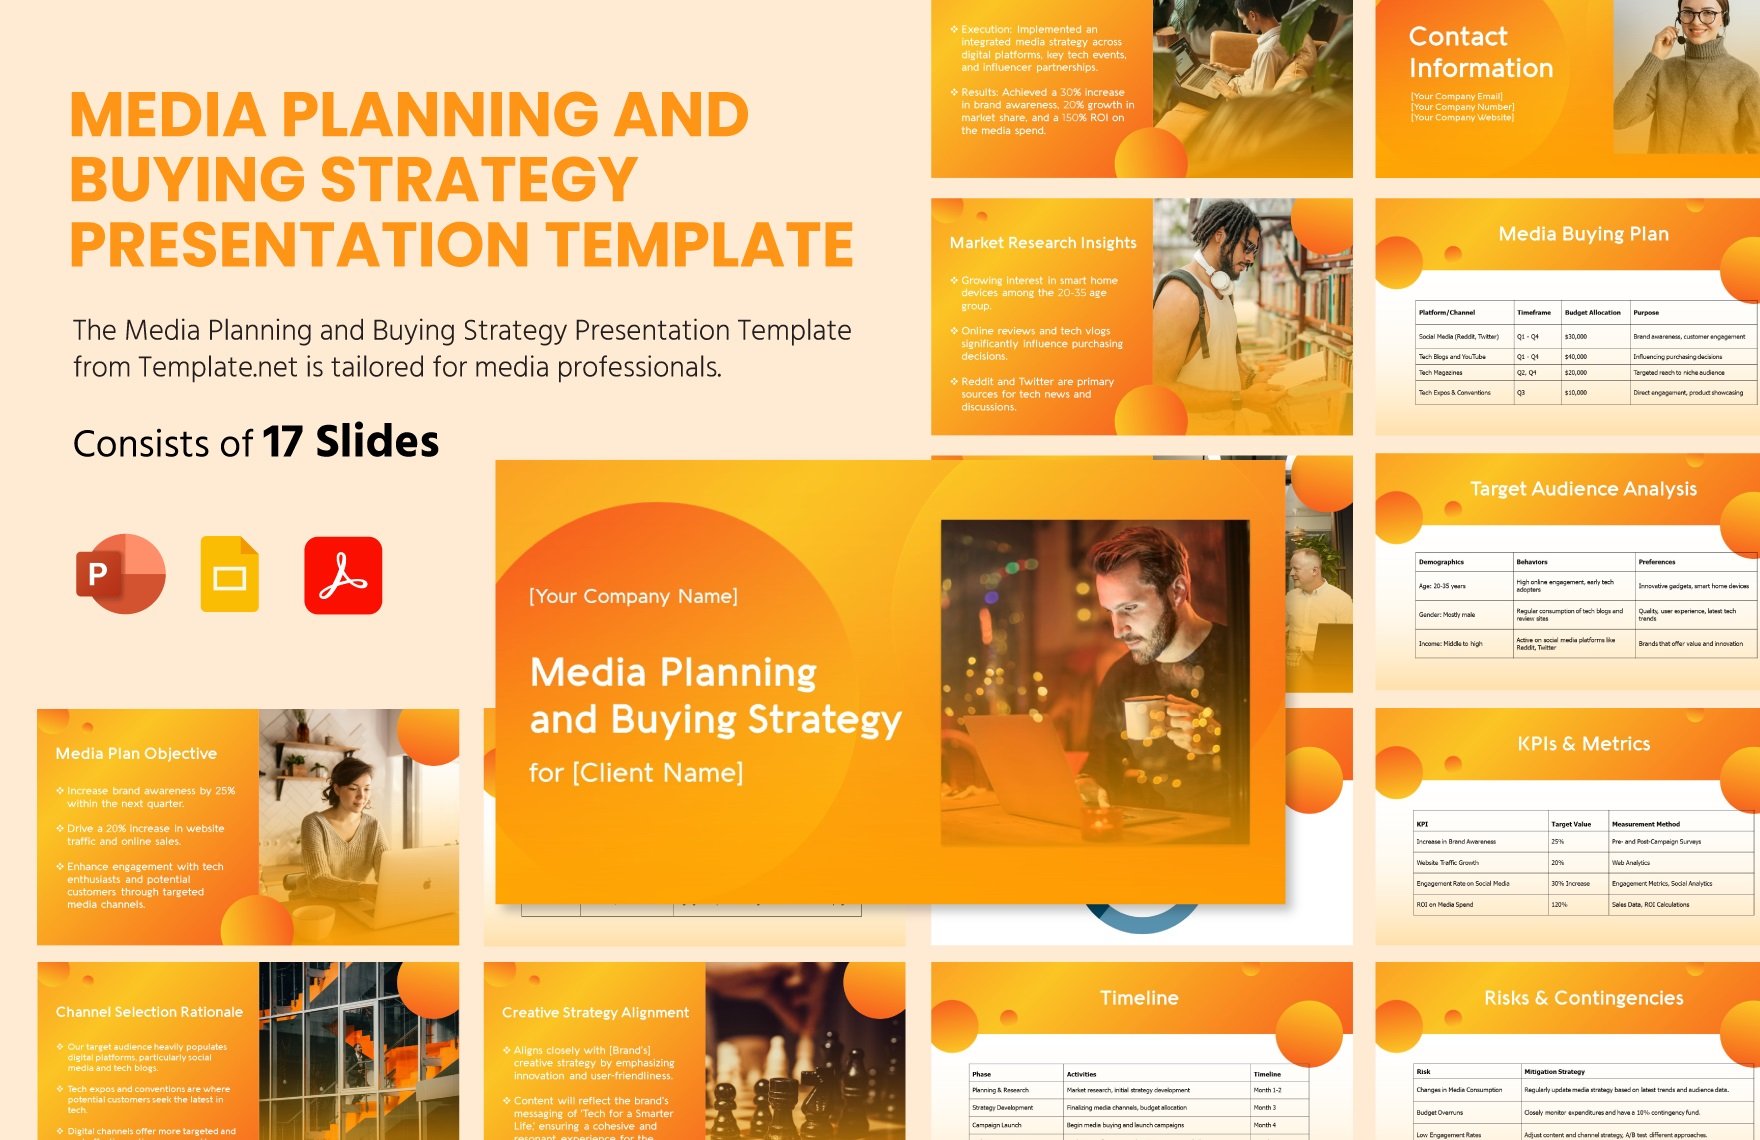 Media Planning and Buying Strategy Presentation Template